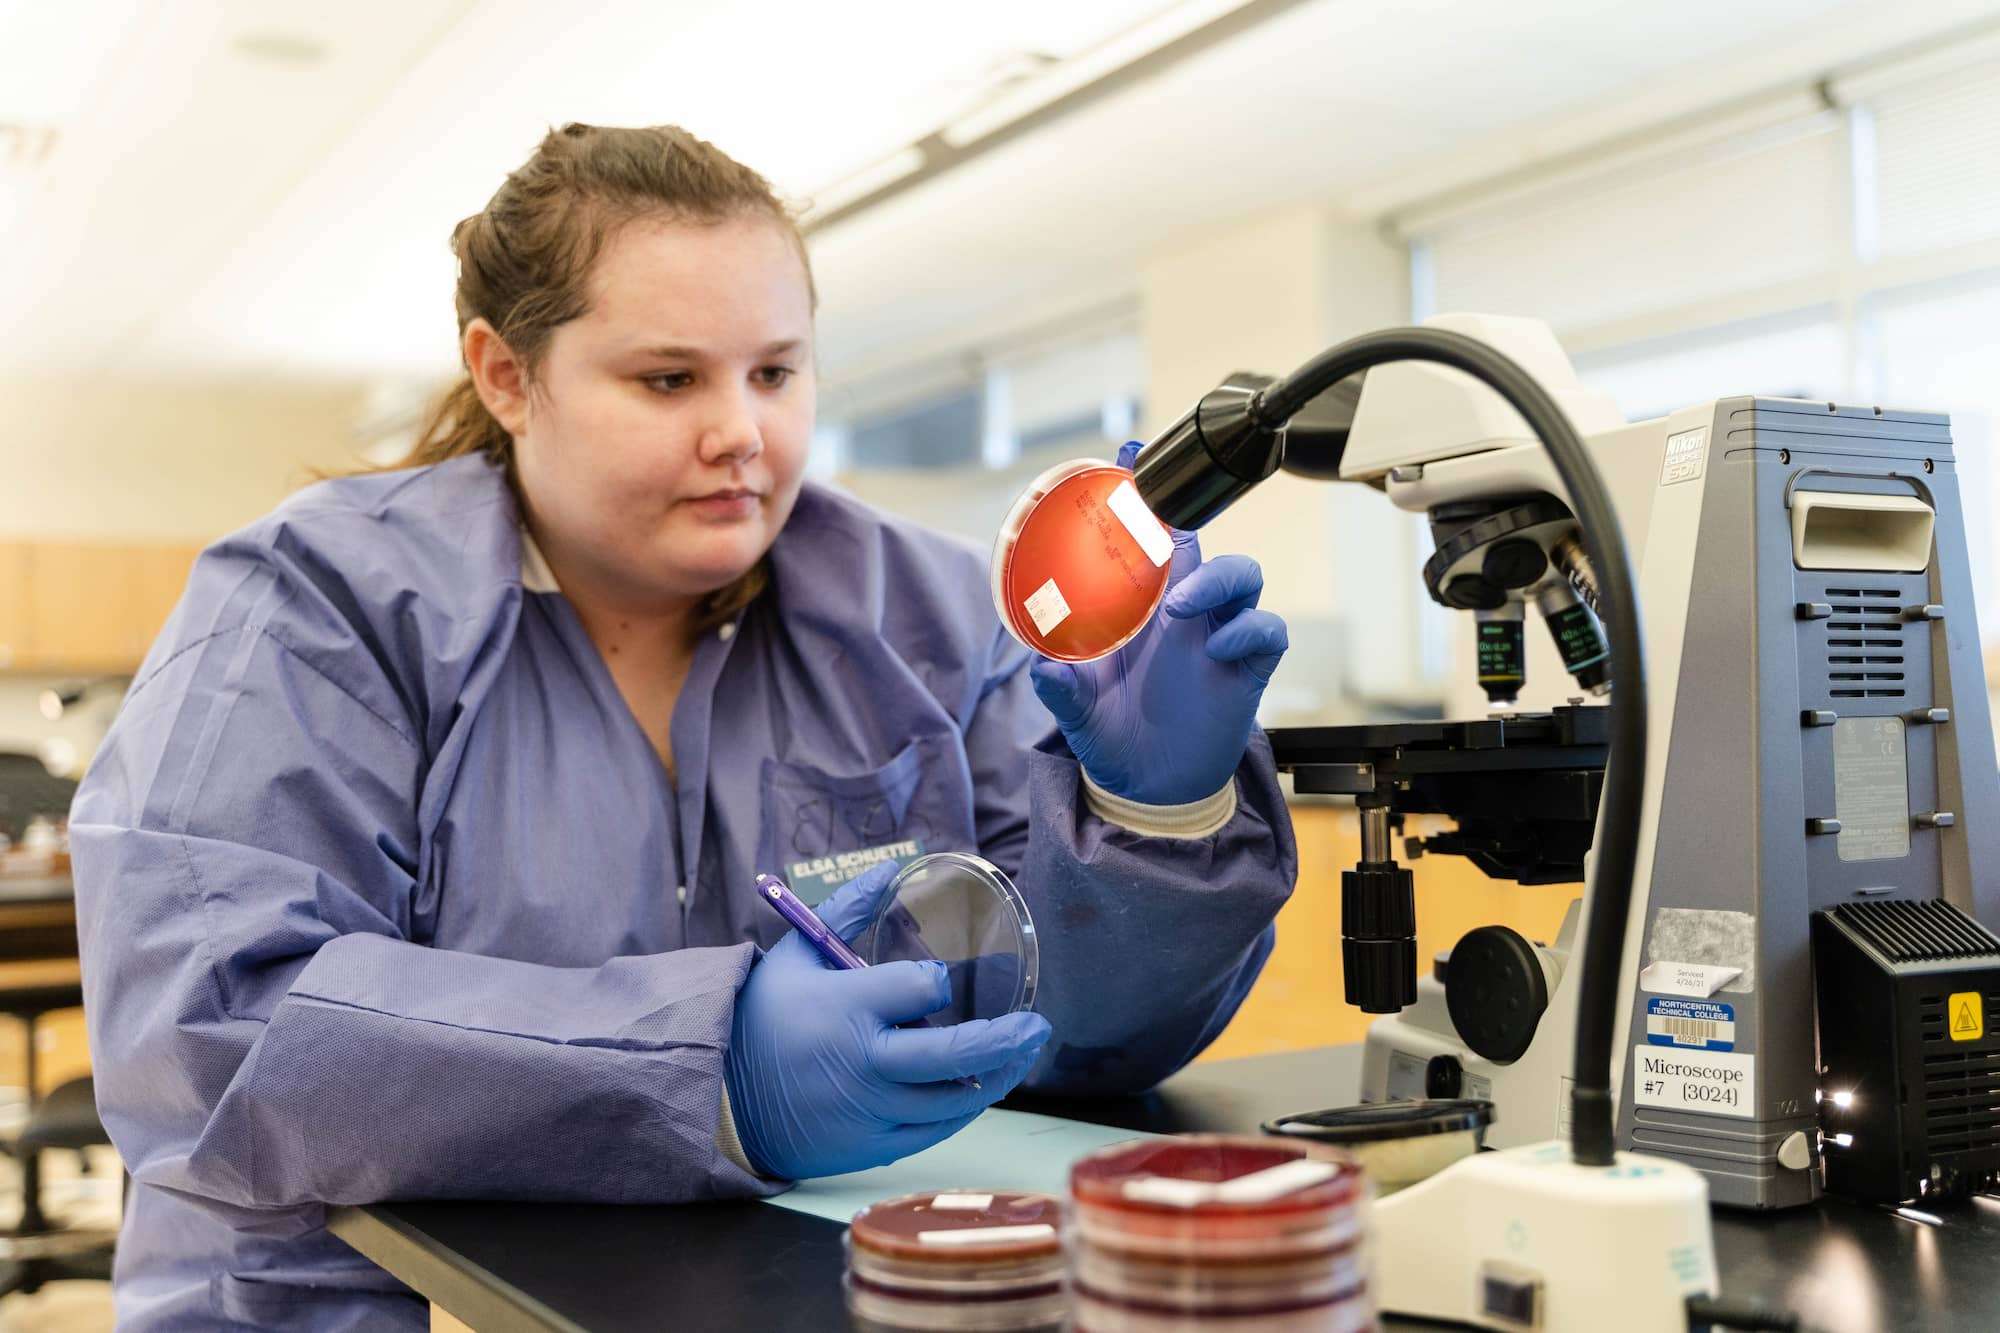 While examining microbiology samples, a student takes notes on her findings.